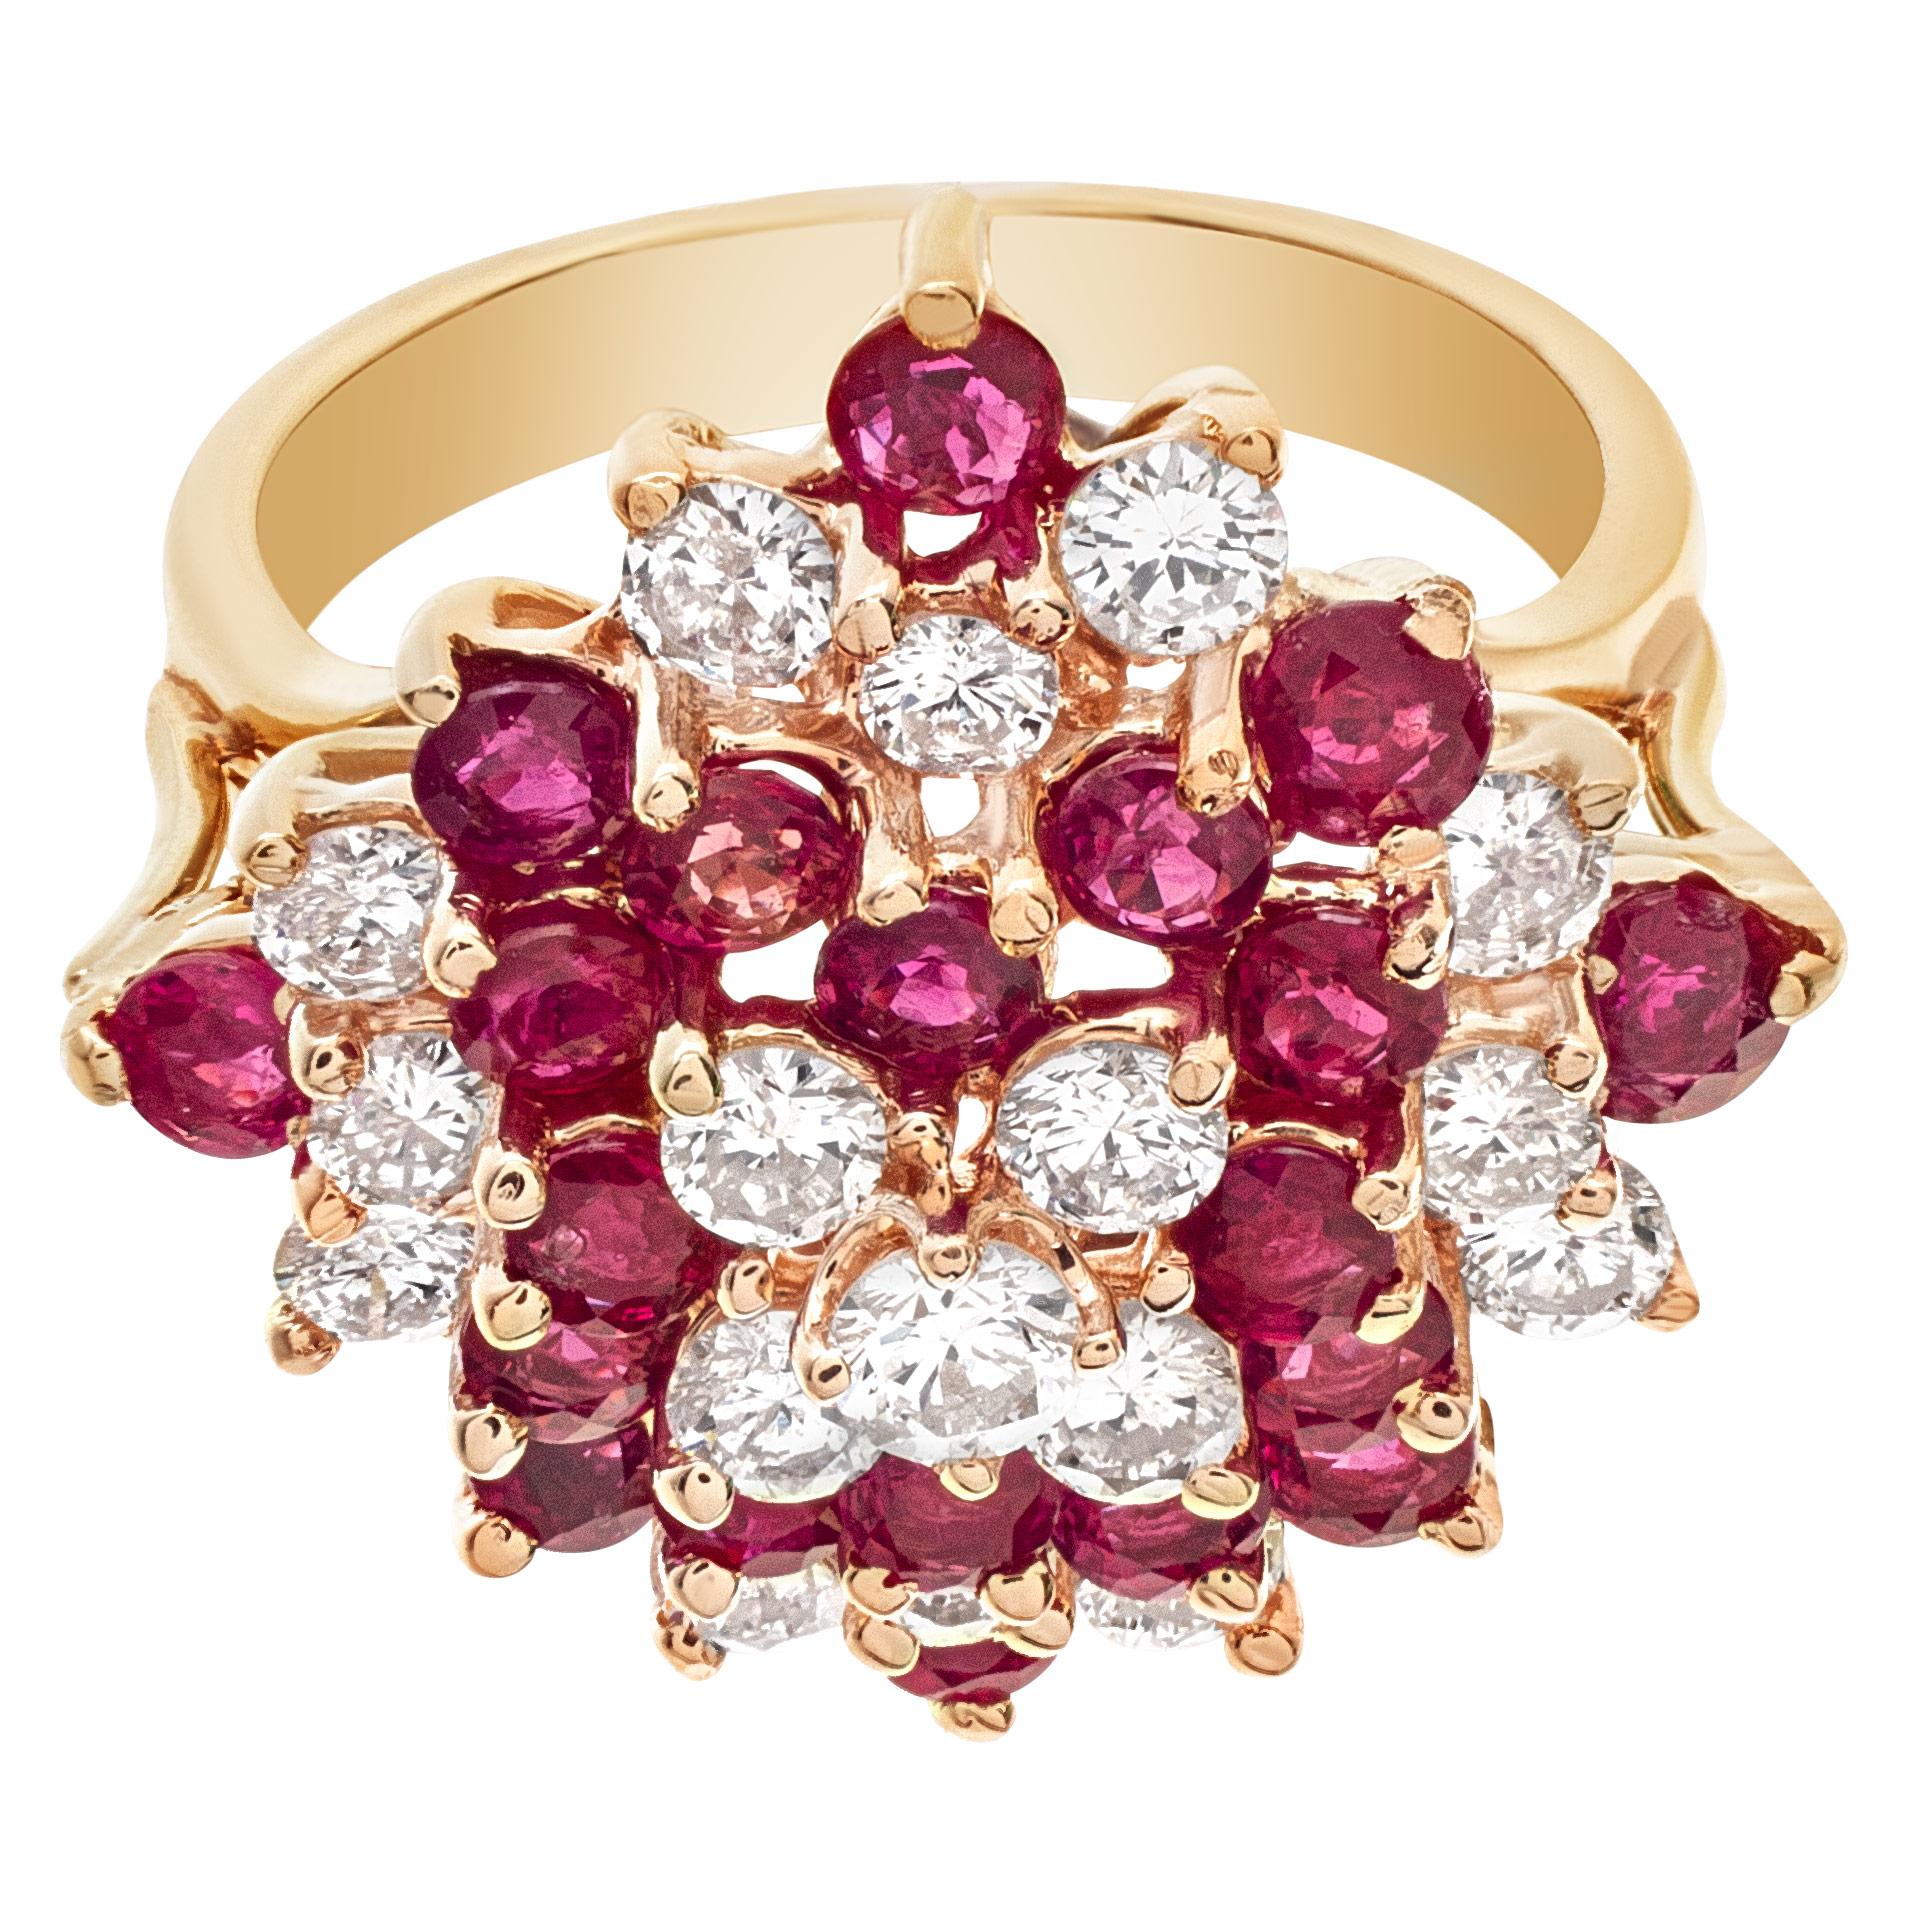 Ruby & diamond cluster ring in 14k yellow gold with approx. 1 carat in G-H color, VS clarity diamonds and 1.50 carats in red rubies. Size 5.75.This Ruby ring is currently size 5.75 and some items can be sized up or down, please ask! It weighs 3.9